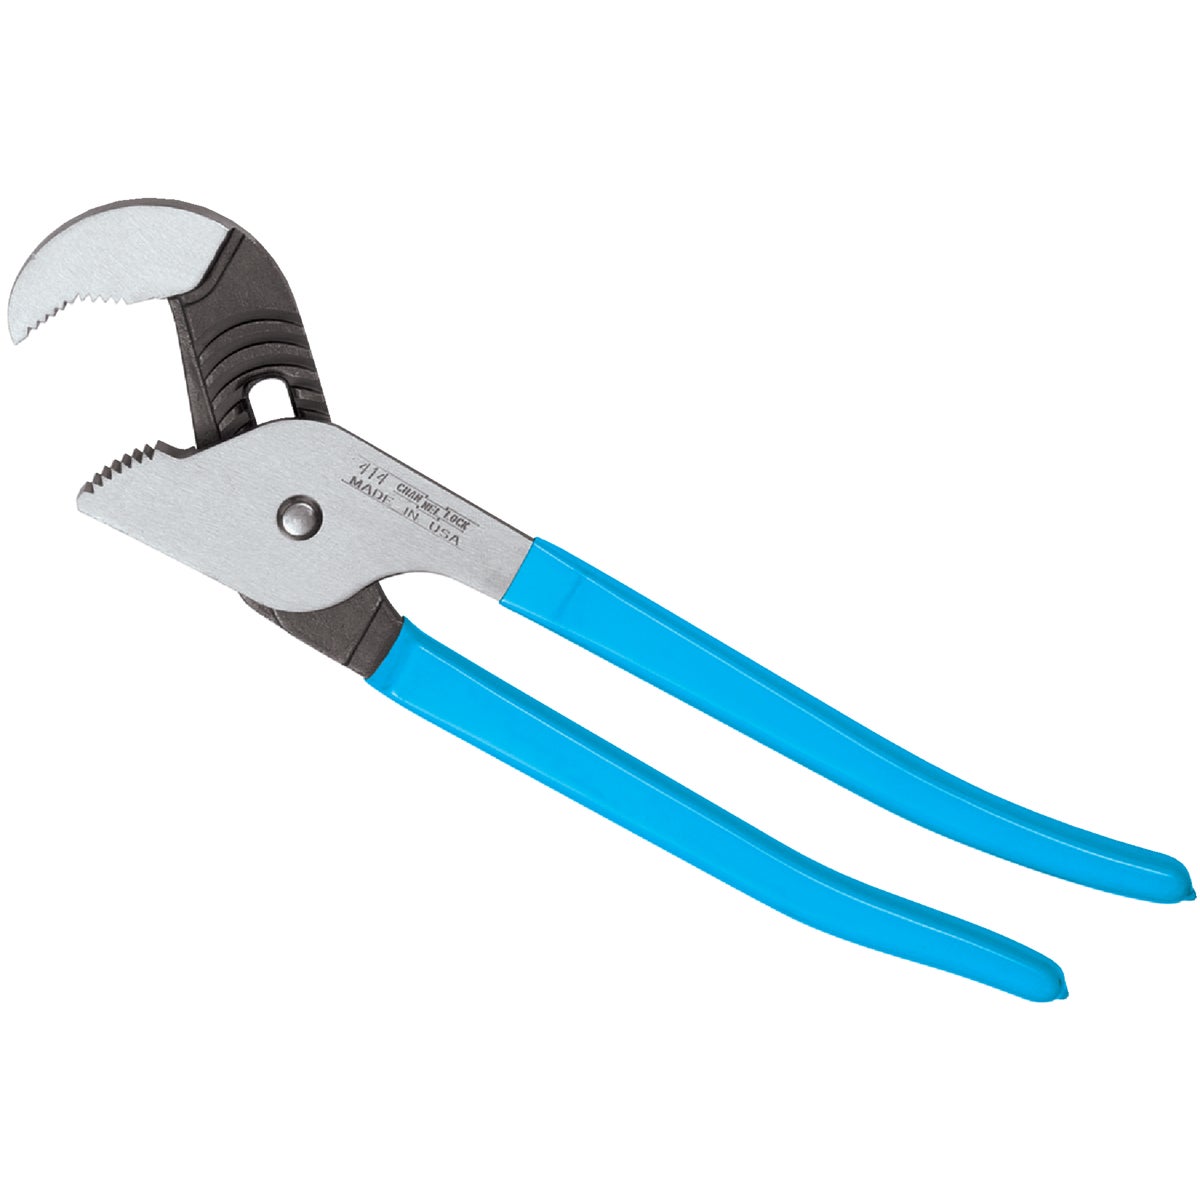 Channellock Nutbuster 14 In. Curved Jaw Groove Joint Pliers